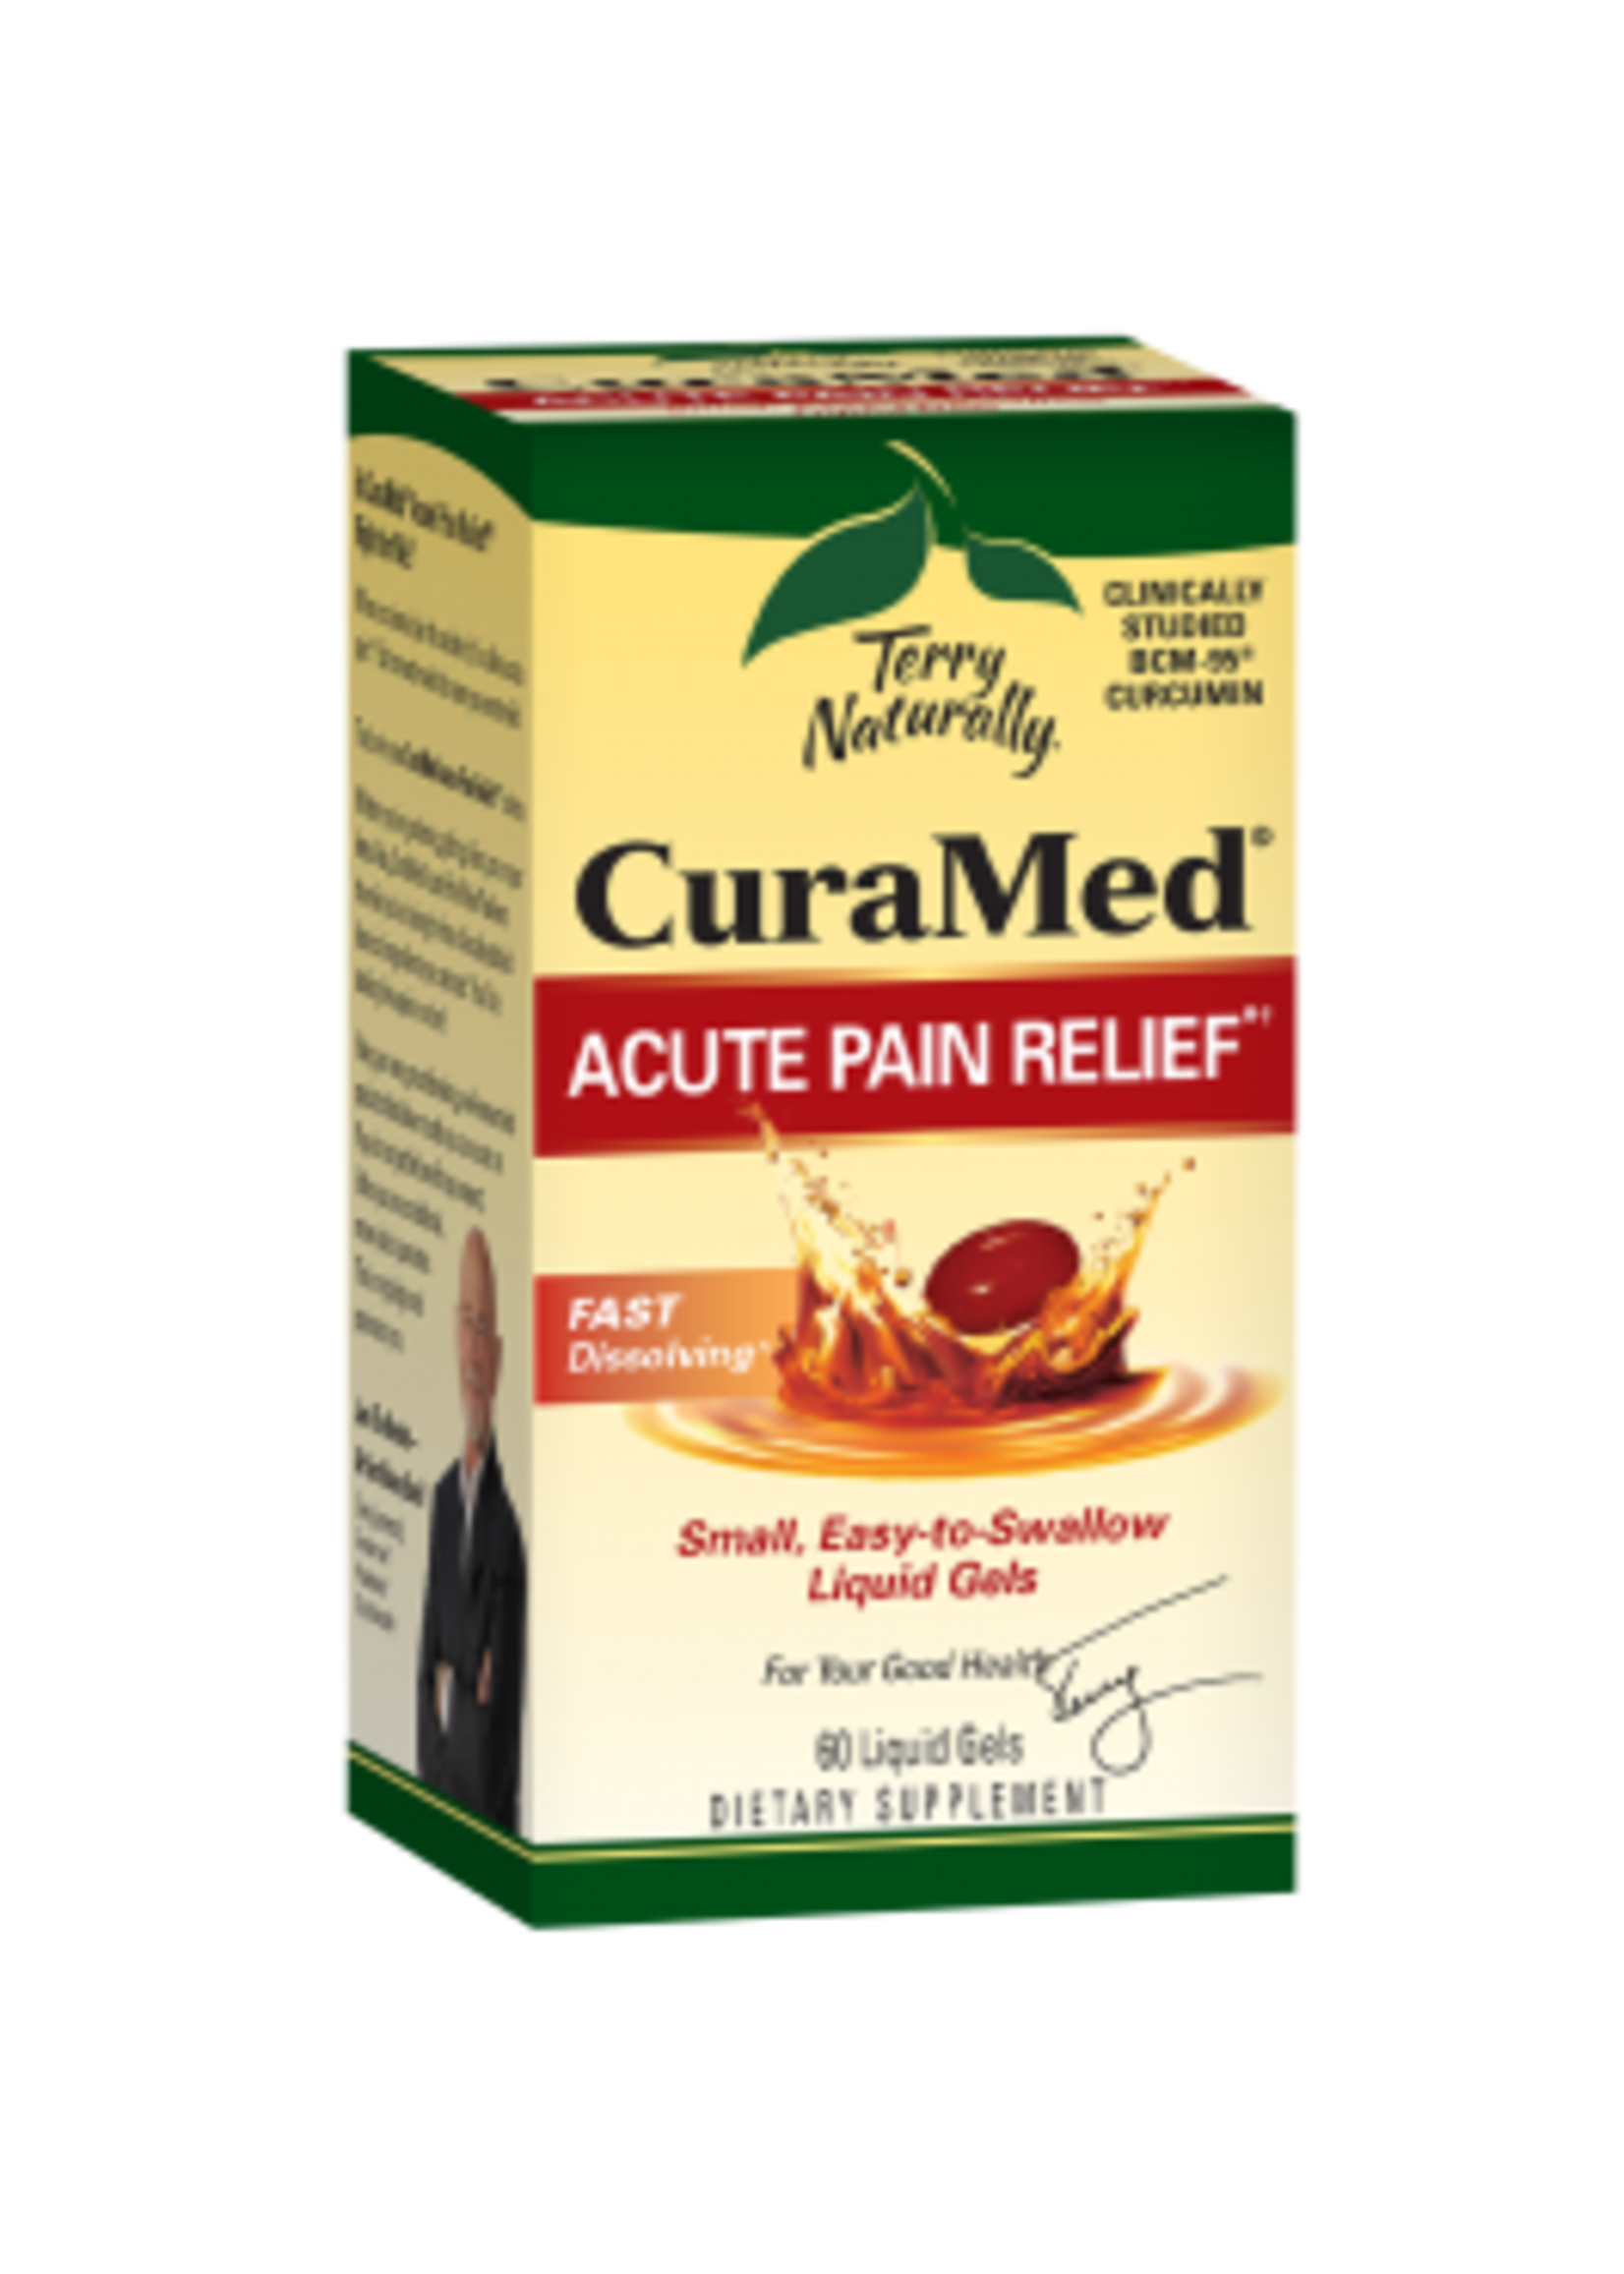 Terry Naturally Cura Med Acute Pain Relief